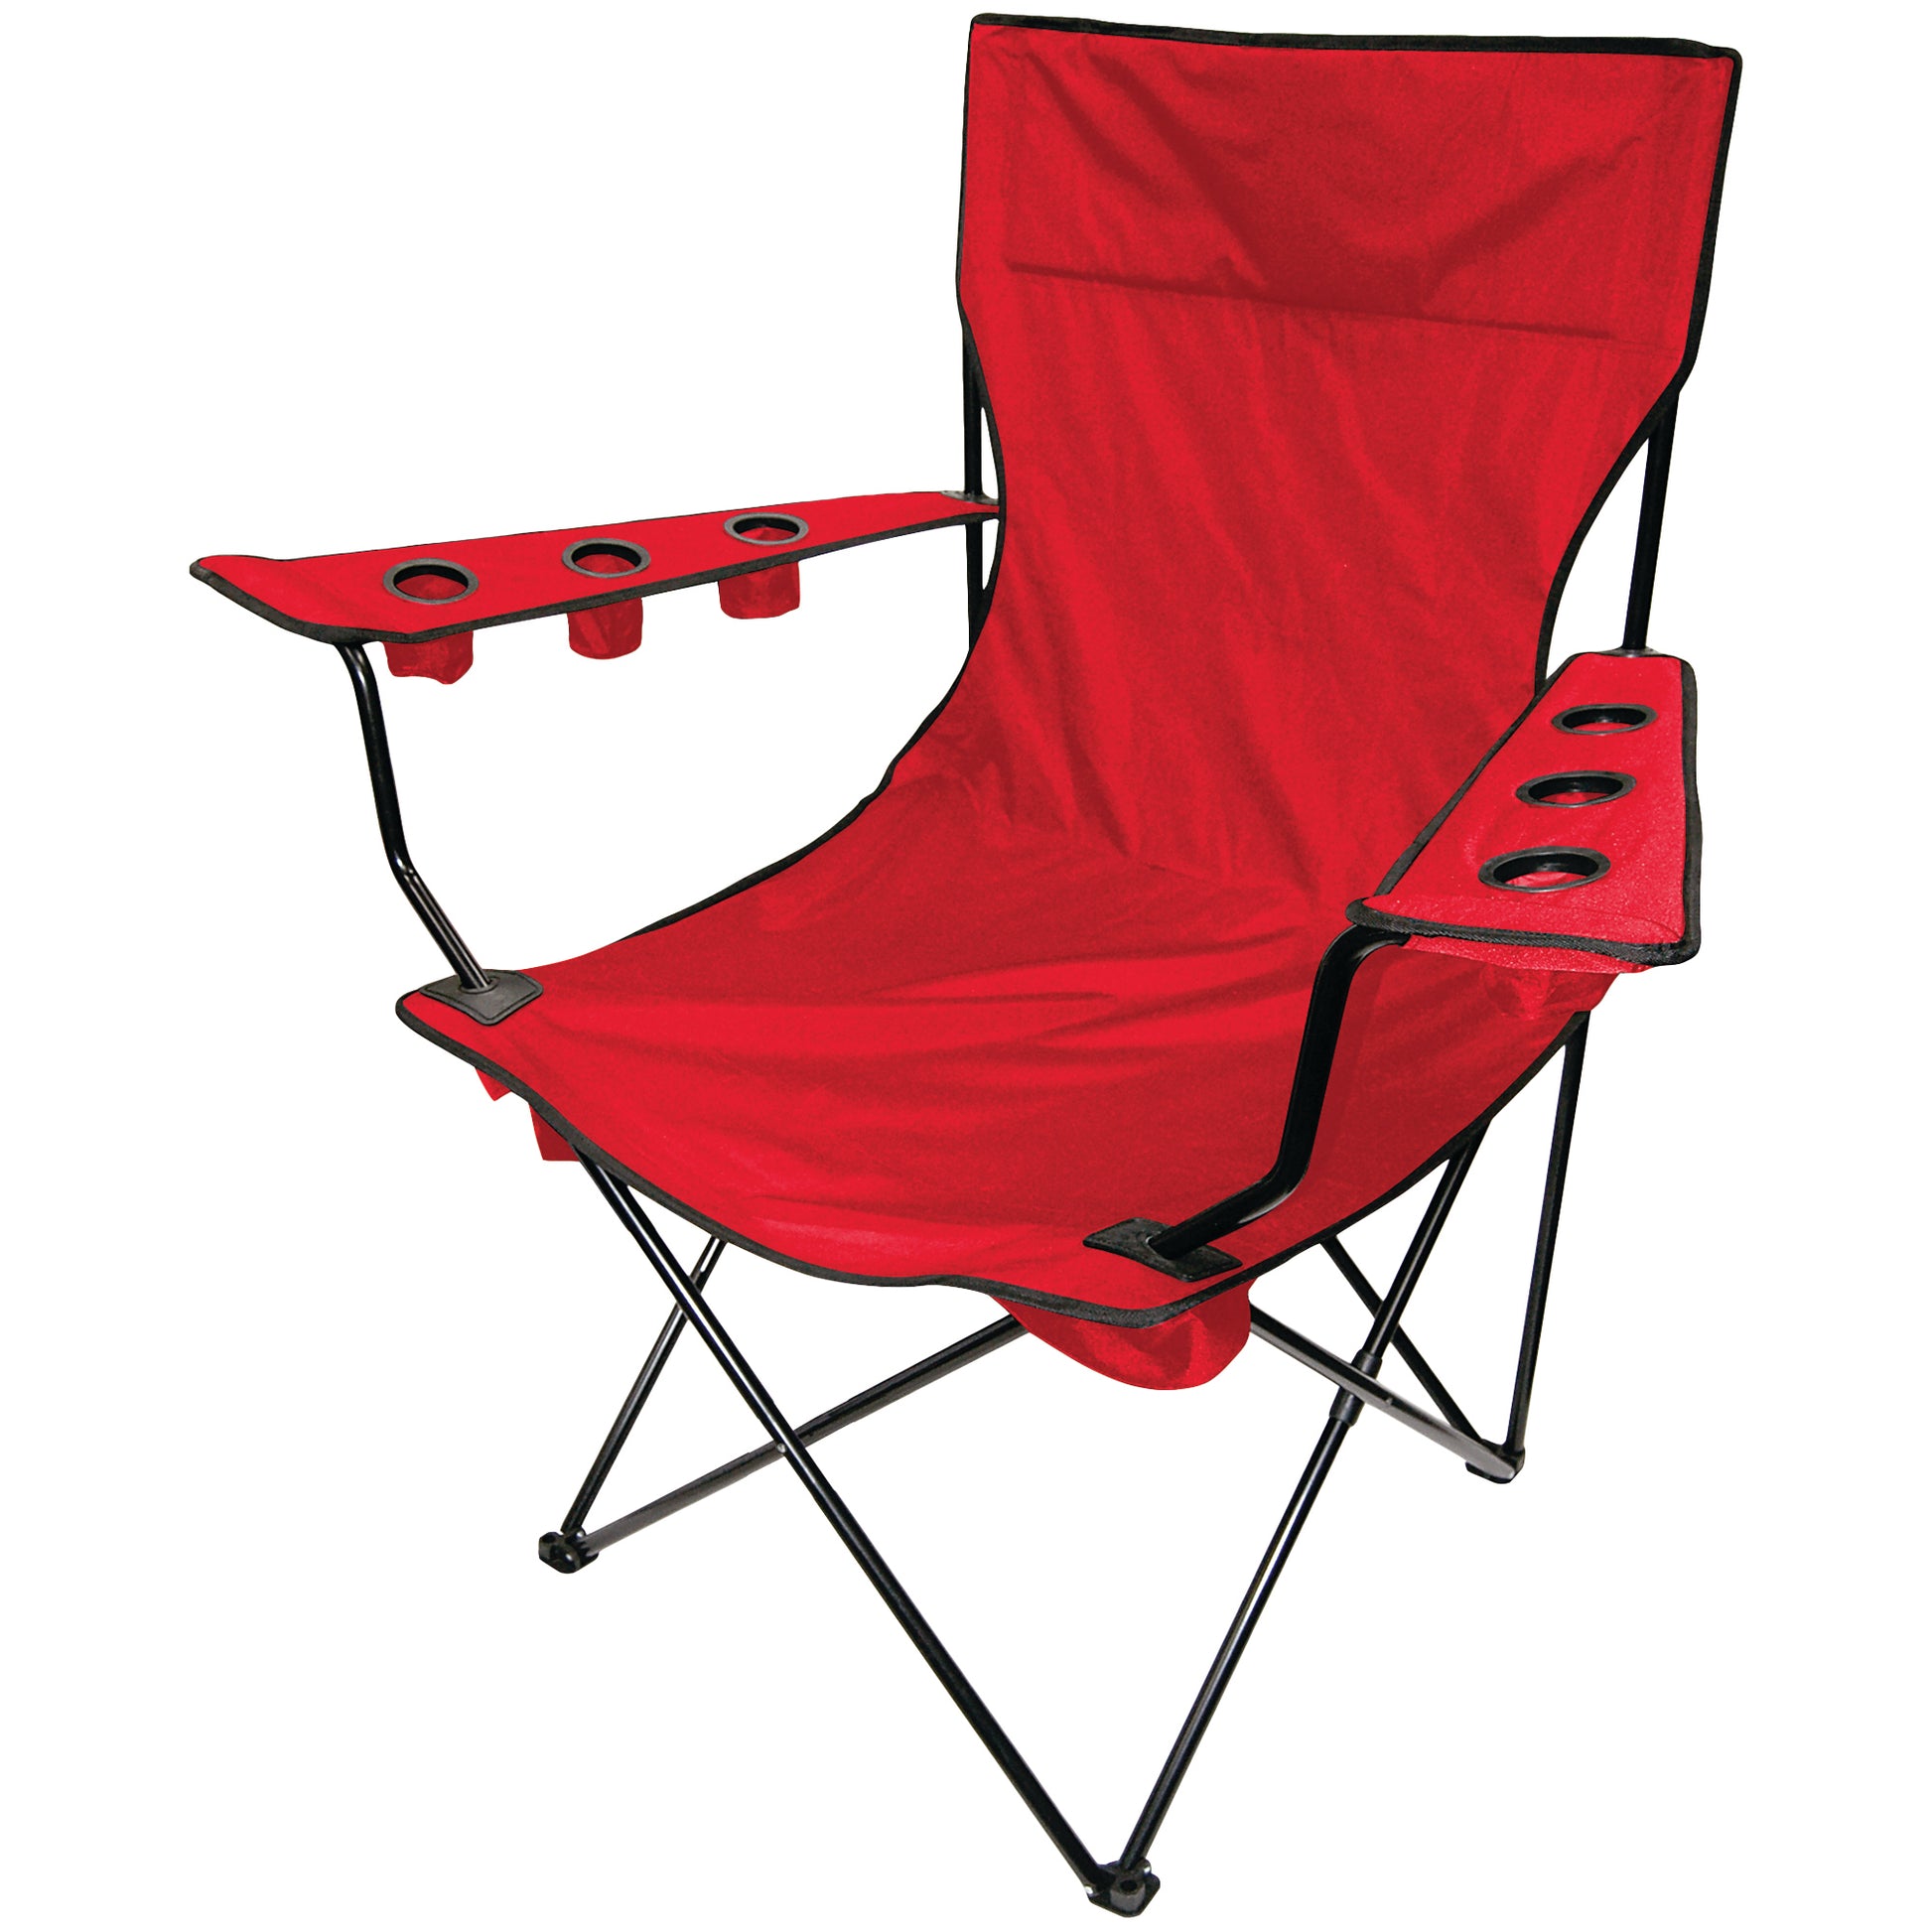 Outdoor Fishing Chair, Complete with Foldable Accessories. - China